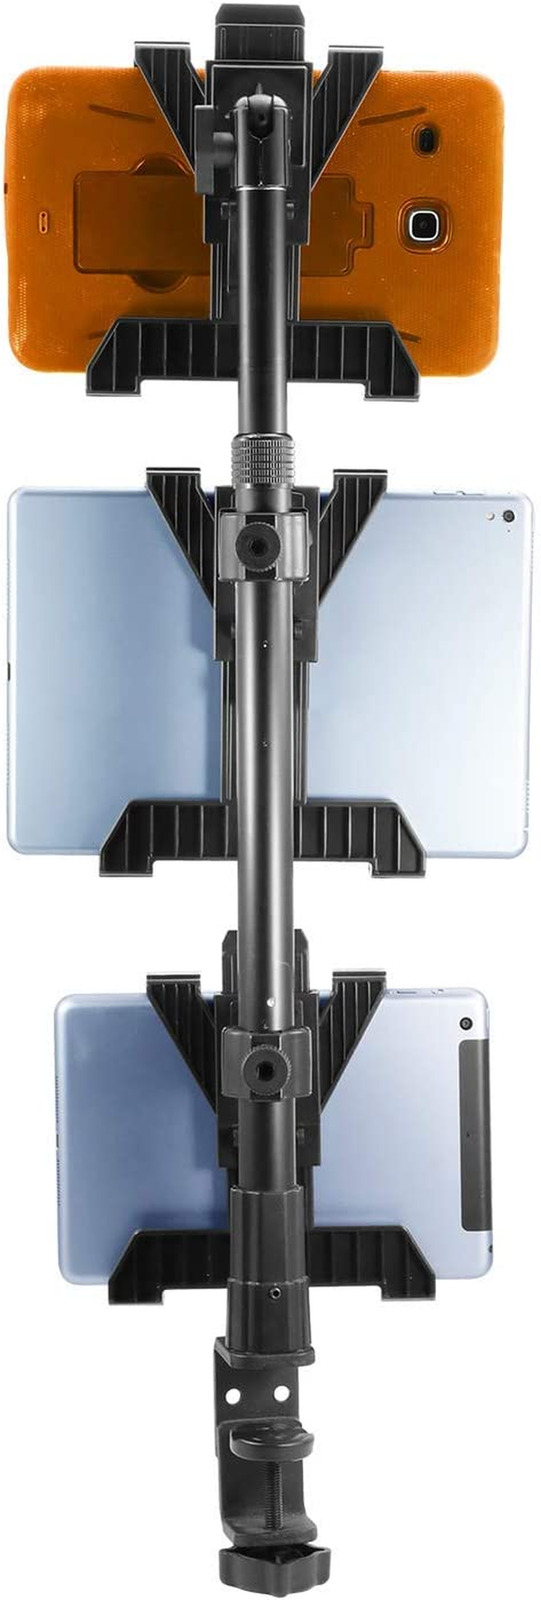 Tablet Tower- Point of Purchase/Pos Clamp Mount - with 3 Tabdock Holders Perfect